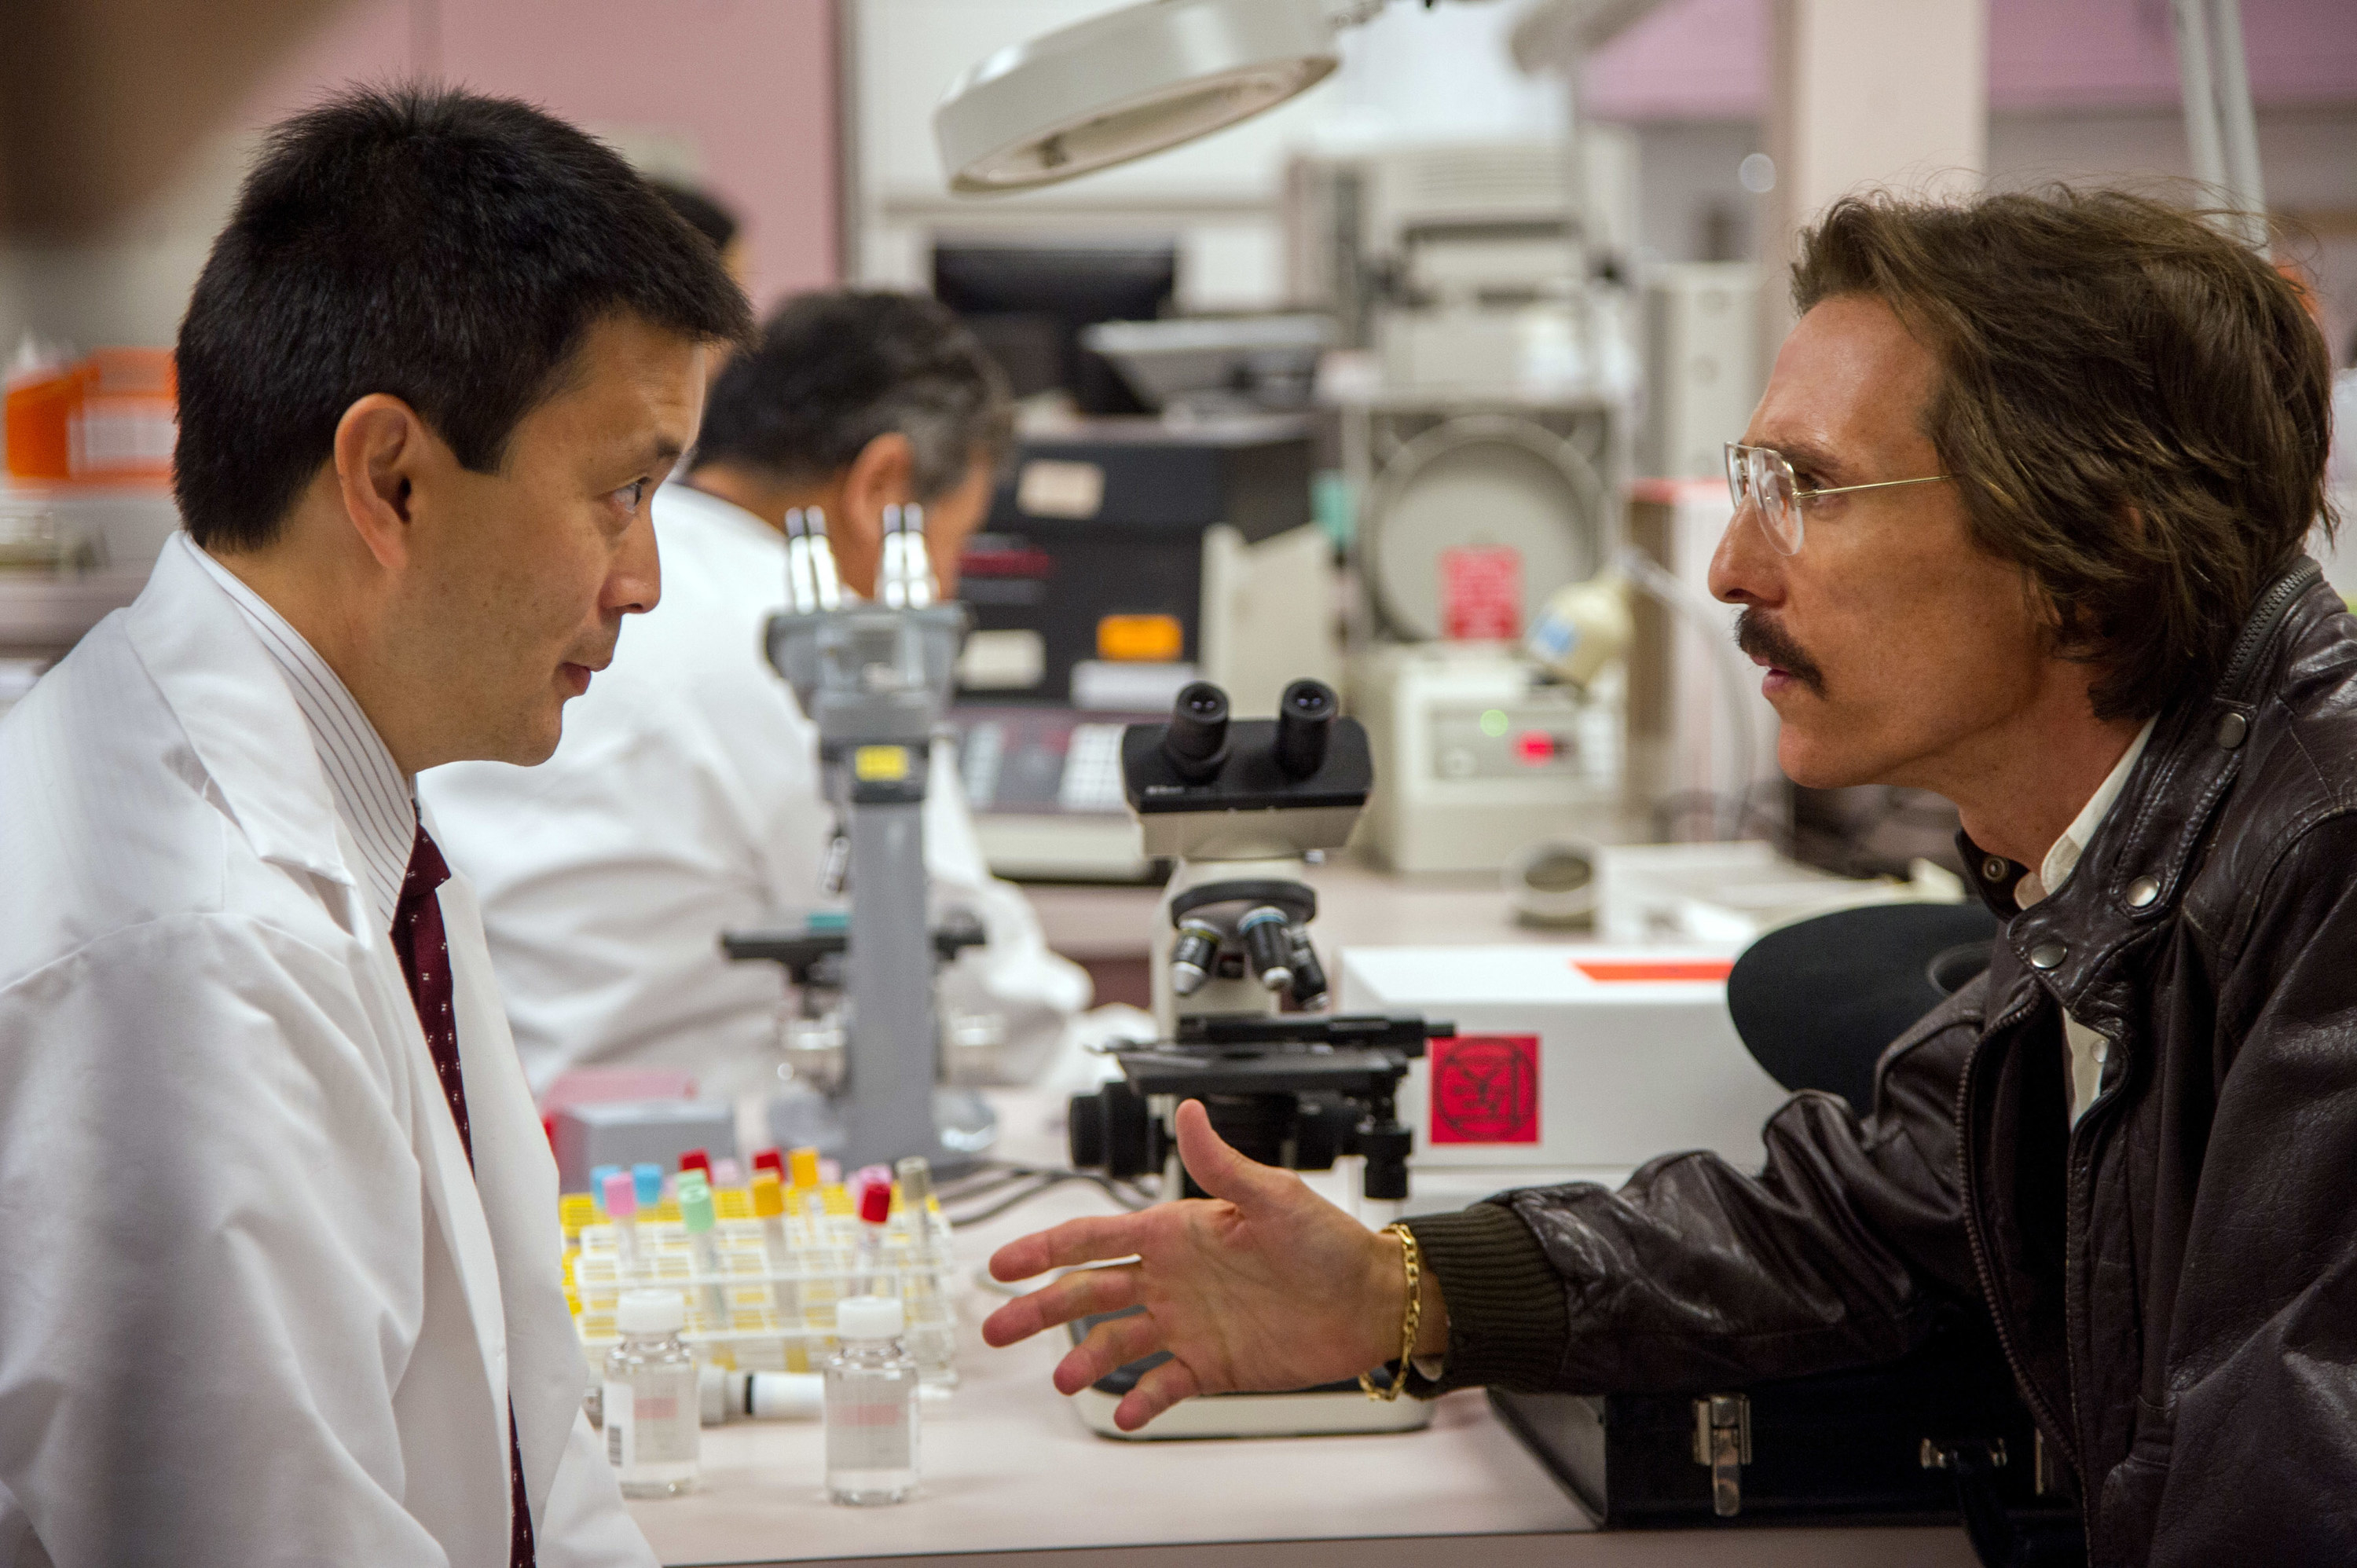 Matthew McConaughey in character wearing a leather jacket, talking to a lab technician